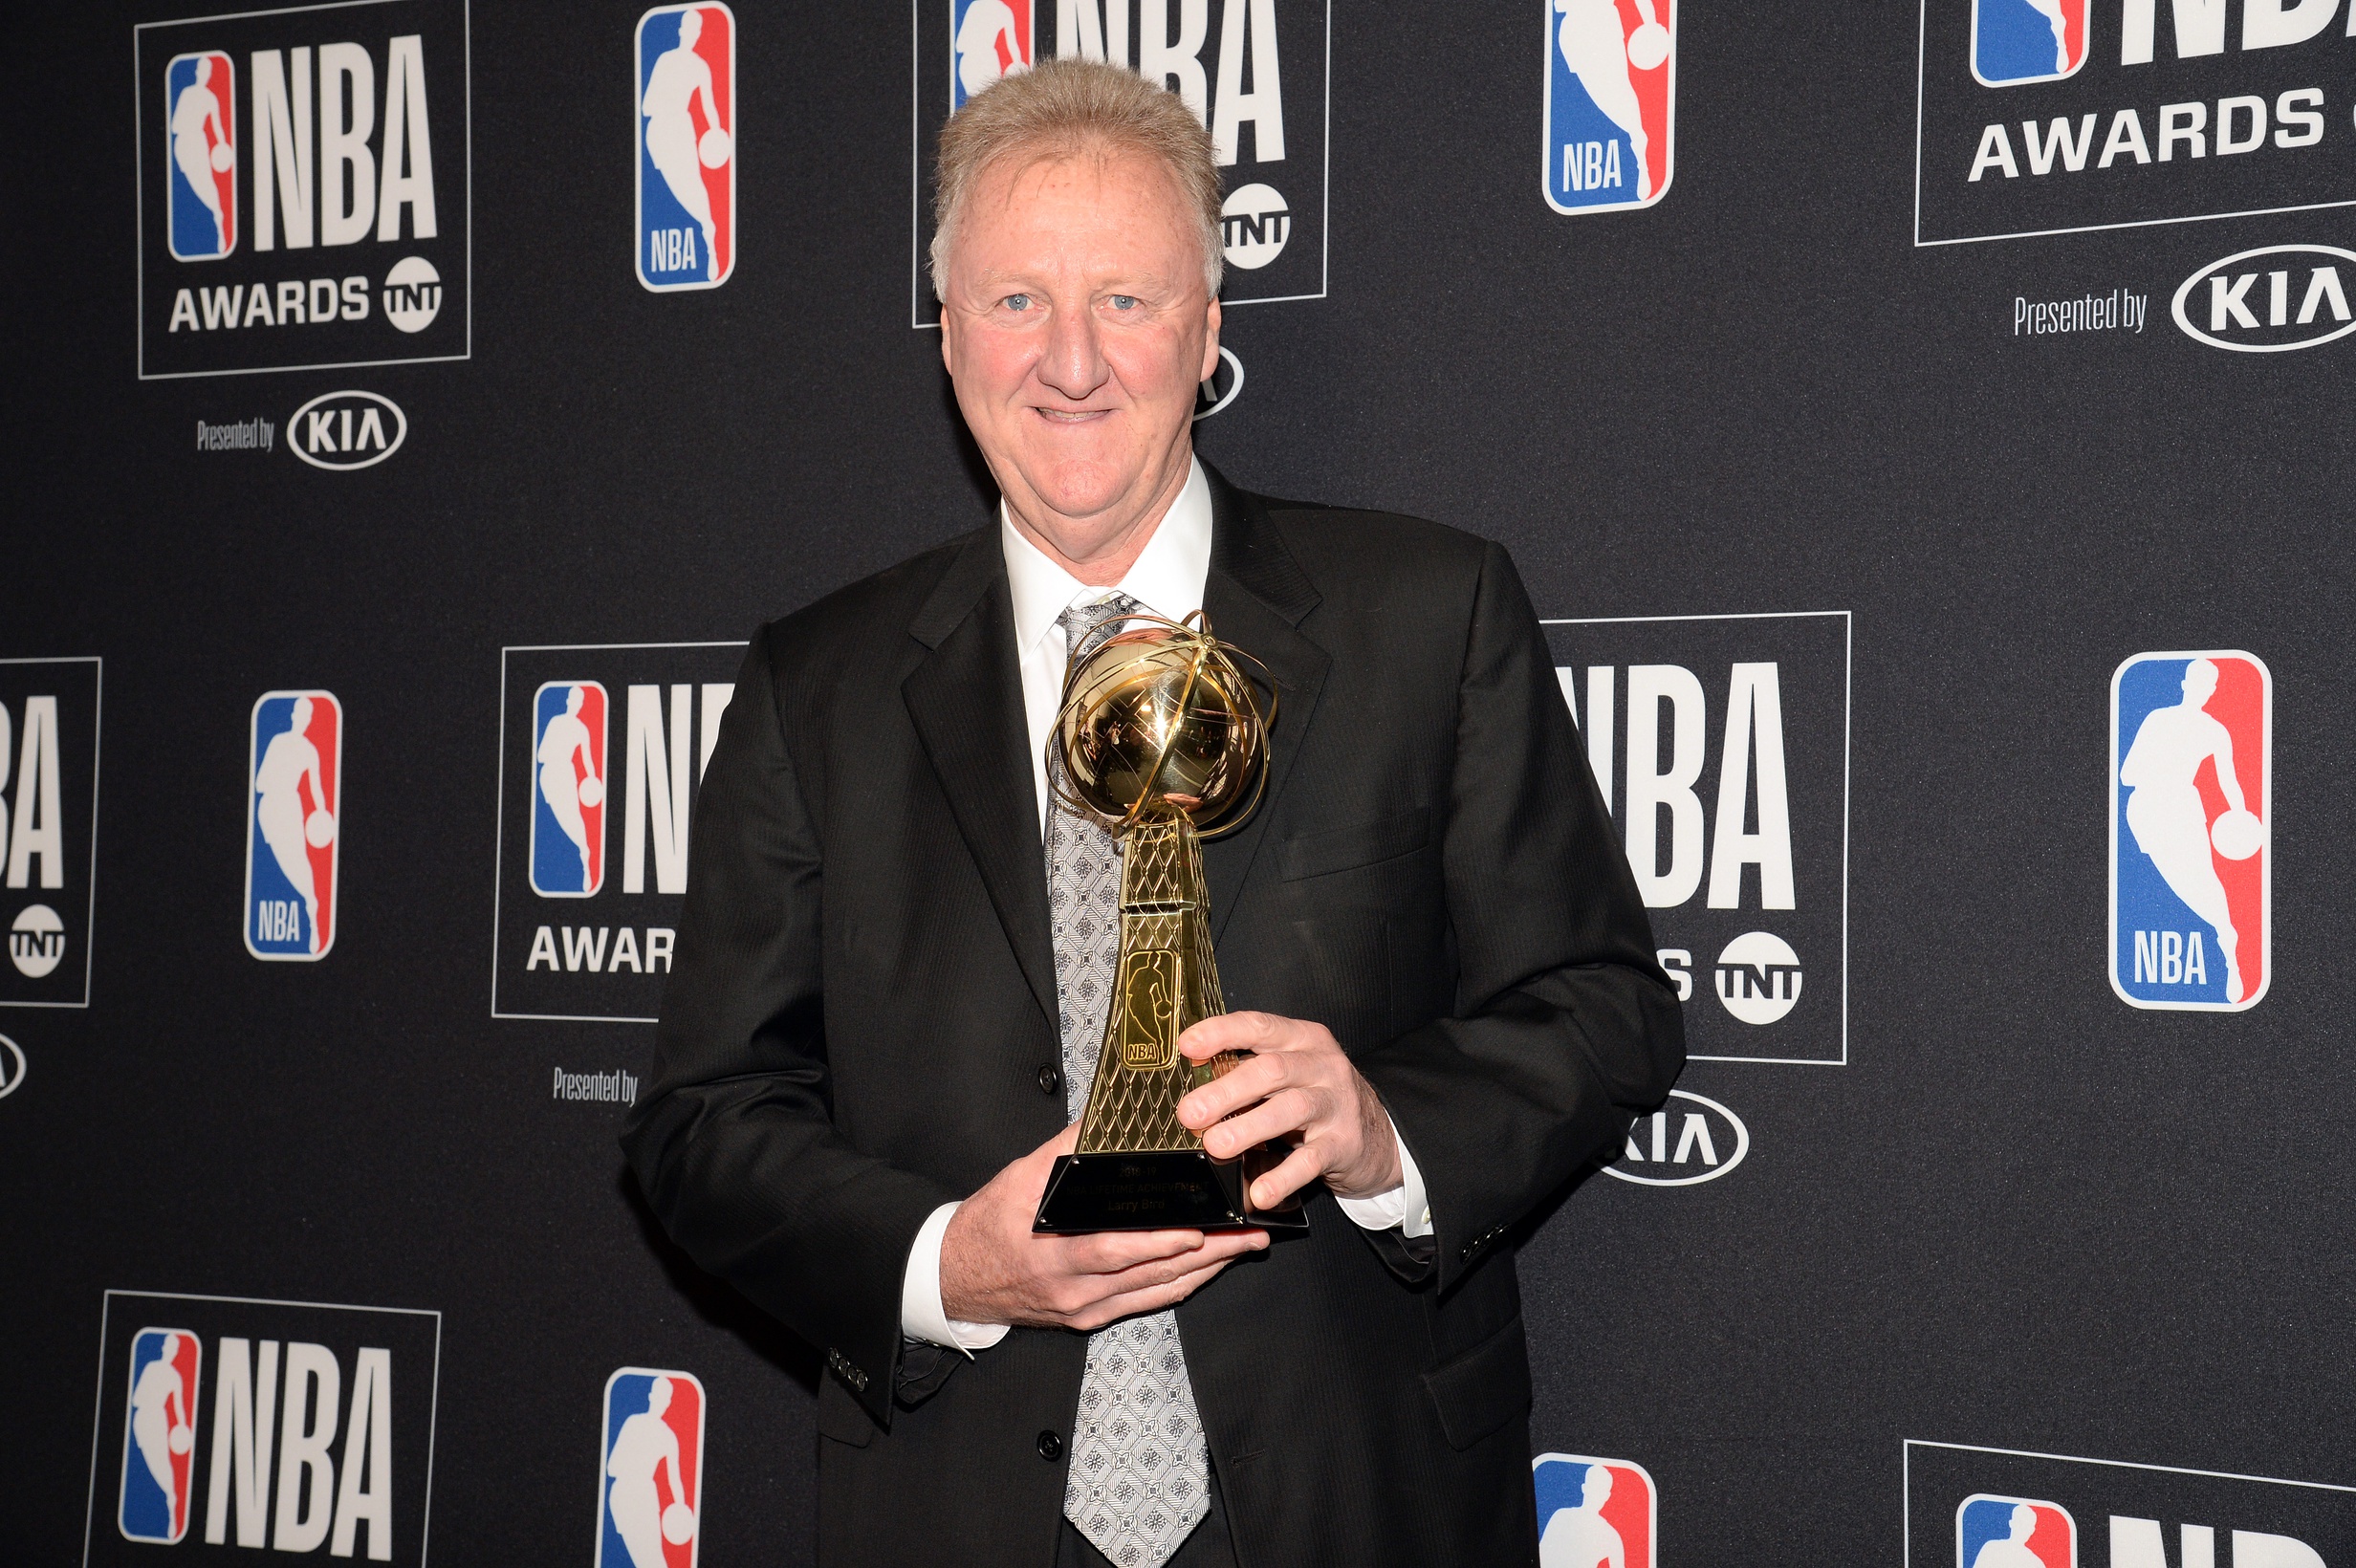 Awful artist is the latest to lose to Larry Bird | The Sports Daily